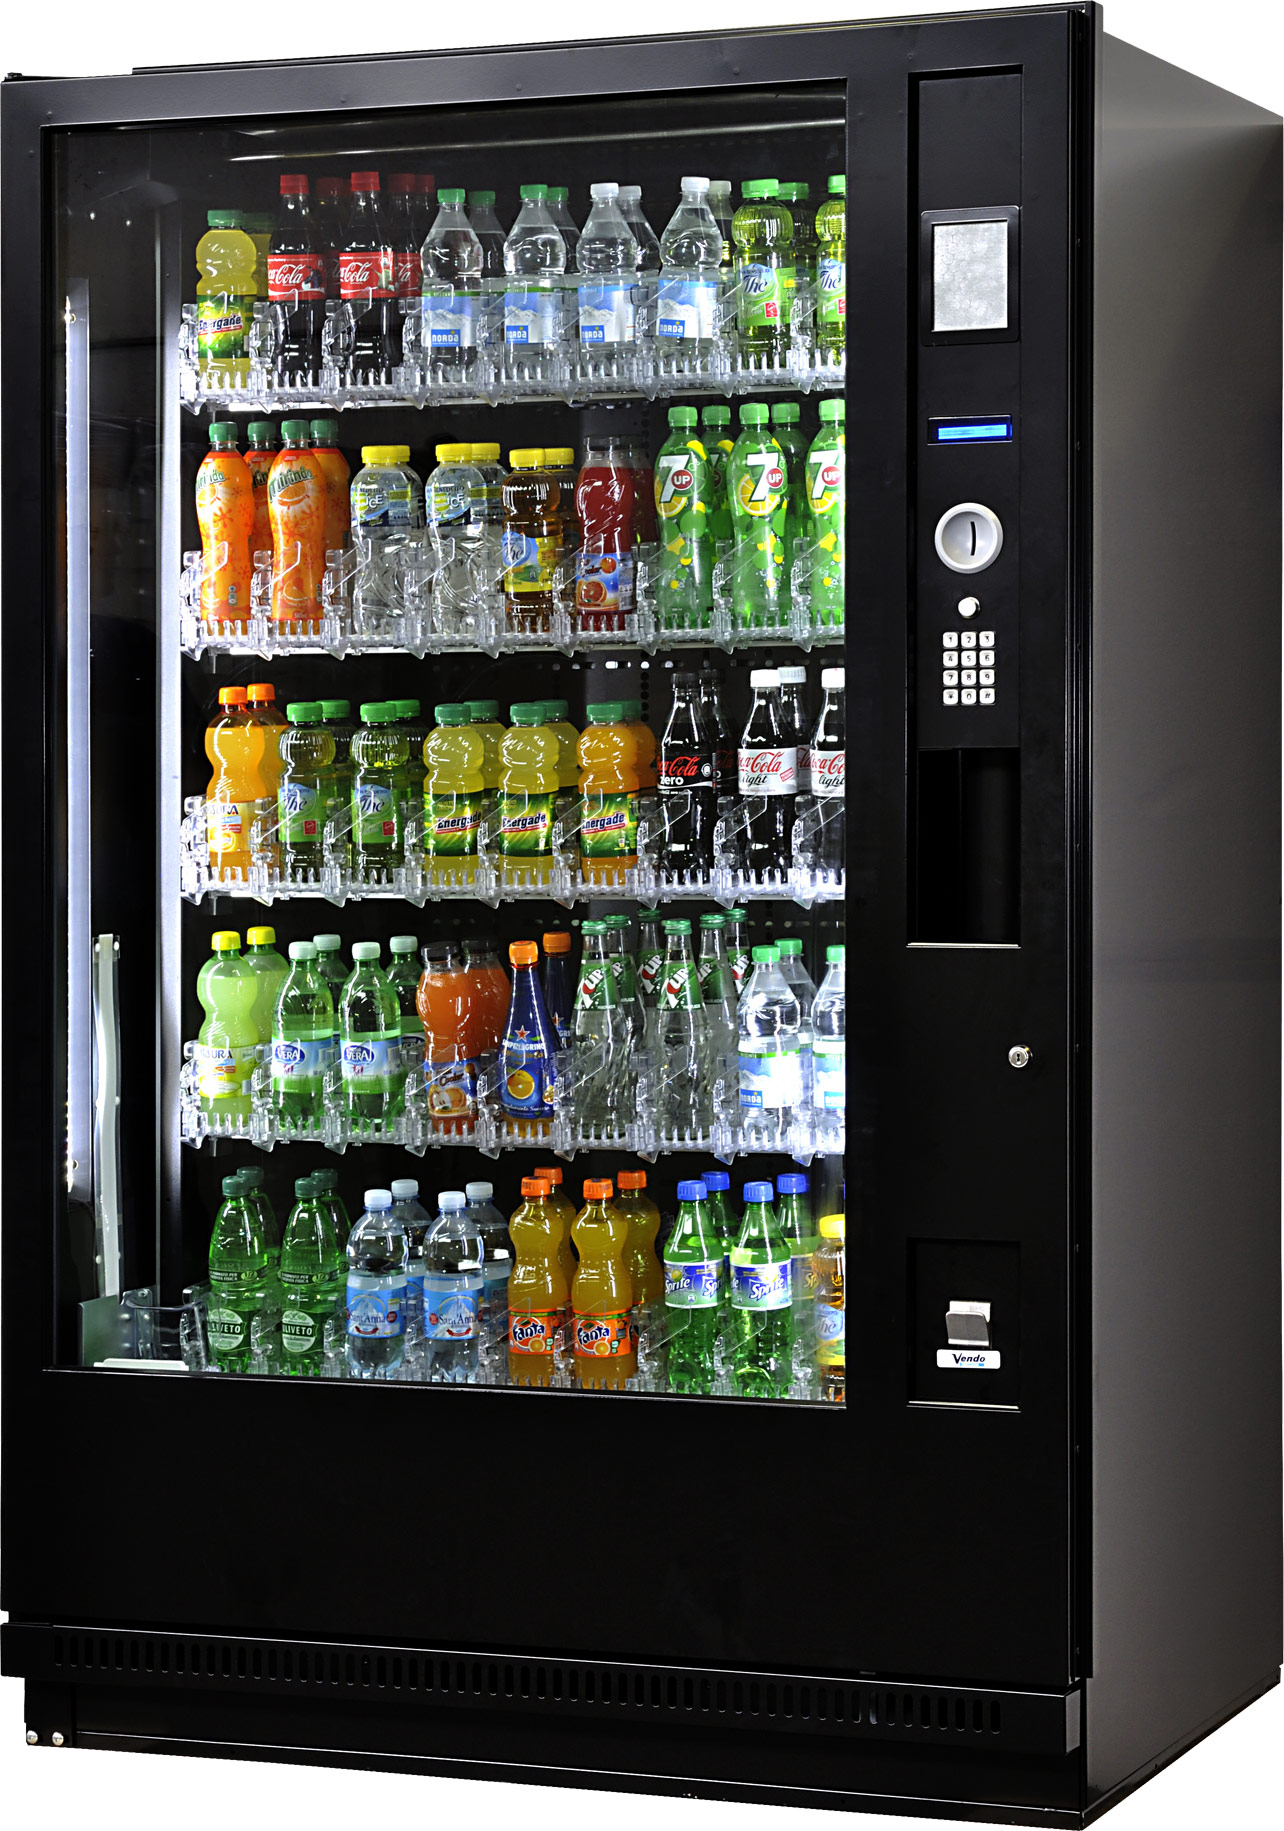 How to Start a Vending Machine Business Without Franchising